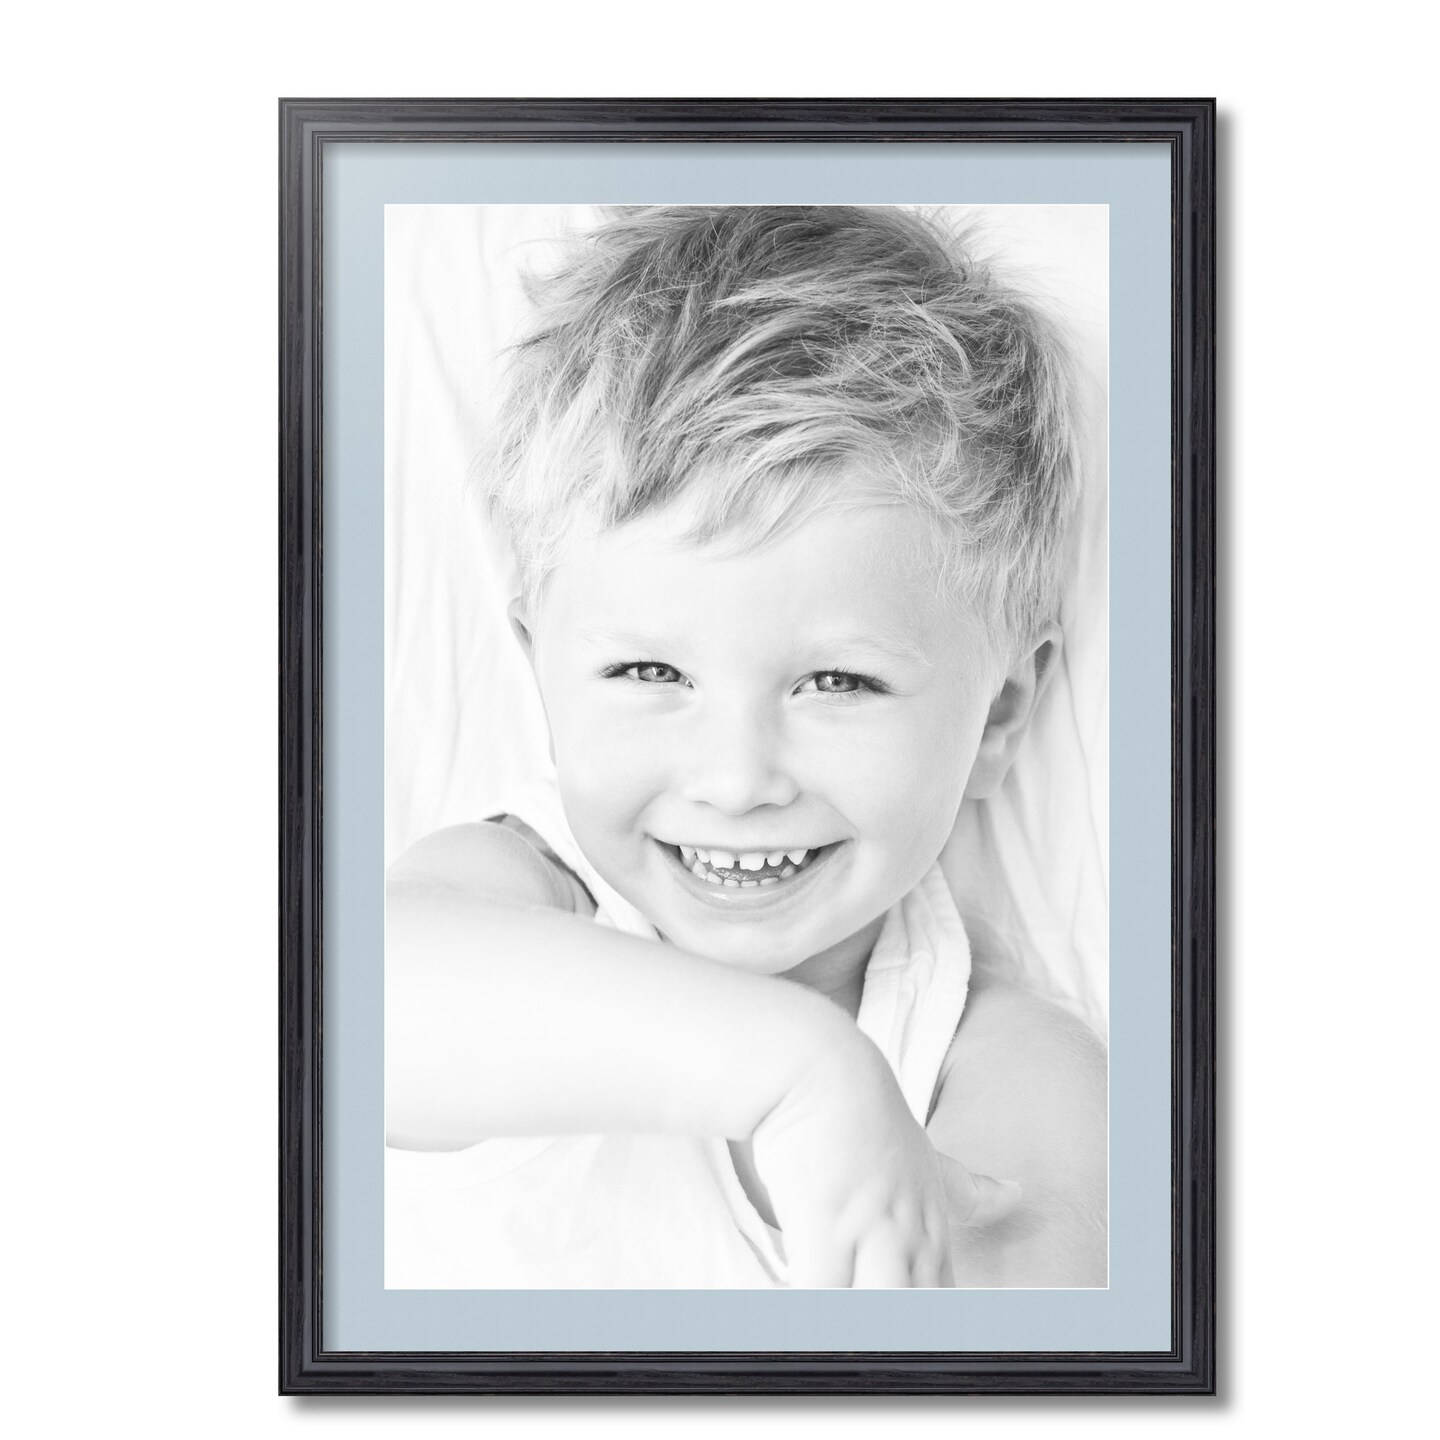 ArtToFrames 20x30 inch Black Custom Mat for Picture Frame with Opening for 16x26 inch Photos. Mat Only, Frame Not Included (mat-21), Size: 20x30 (FOR